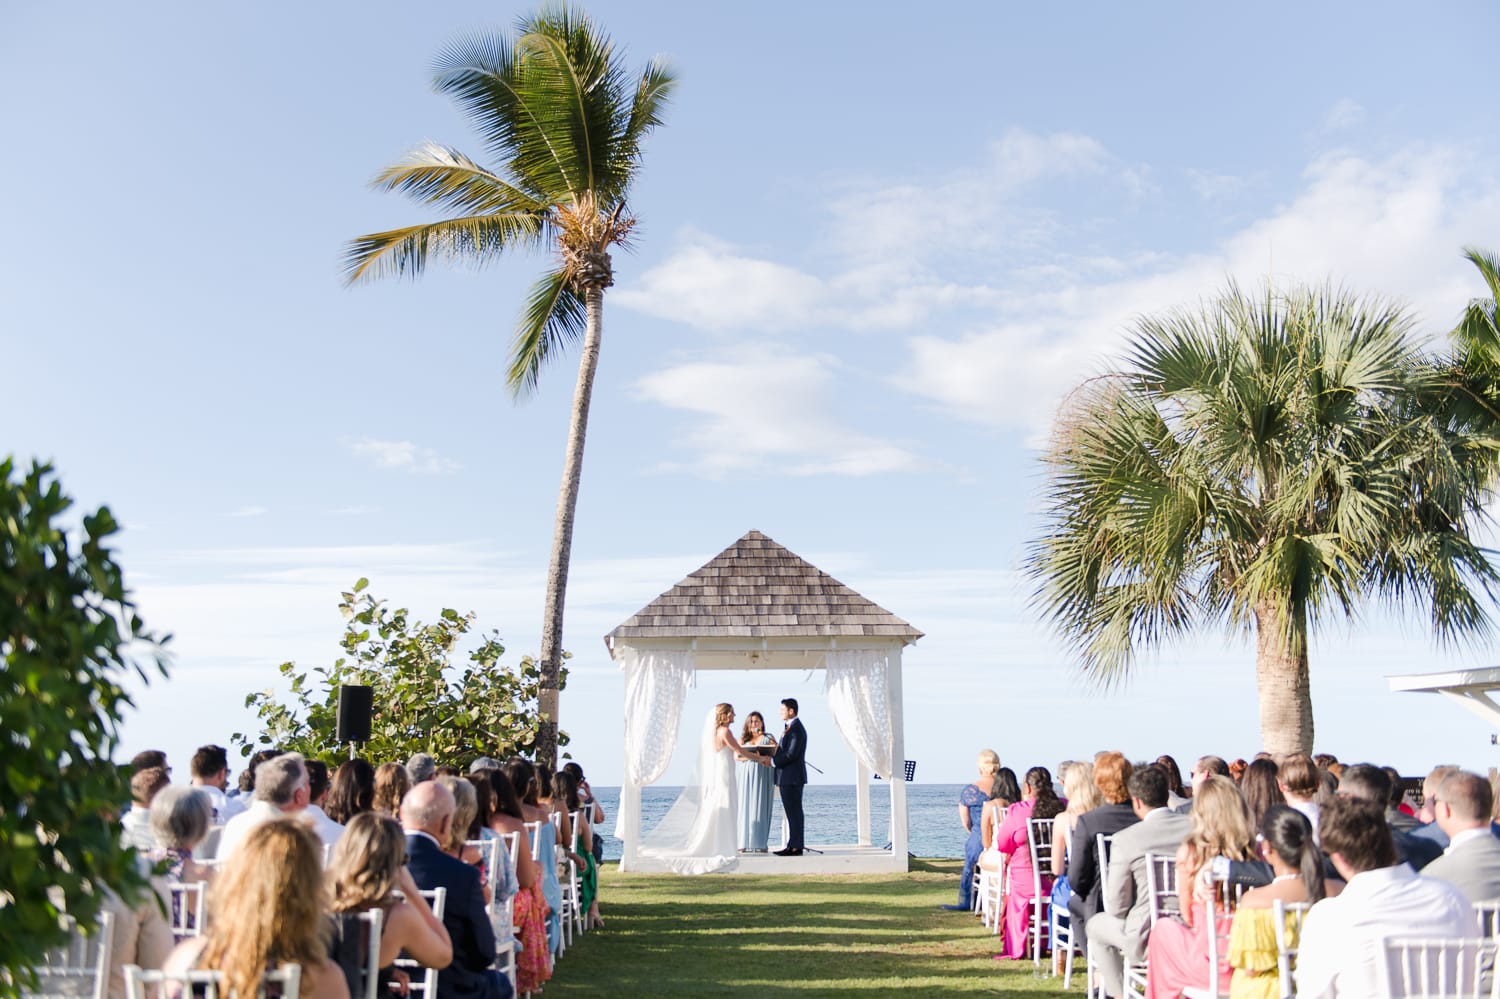 Celebrate your destination wedding with stunning multi-day wedding photography at Villa Montana Beach Resort, Isabela, PR. Book a wedding weekend photography package today.